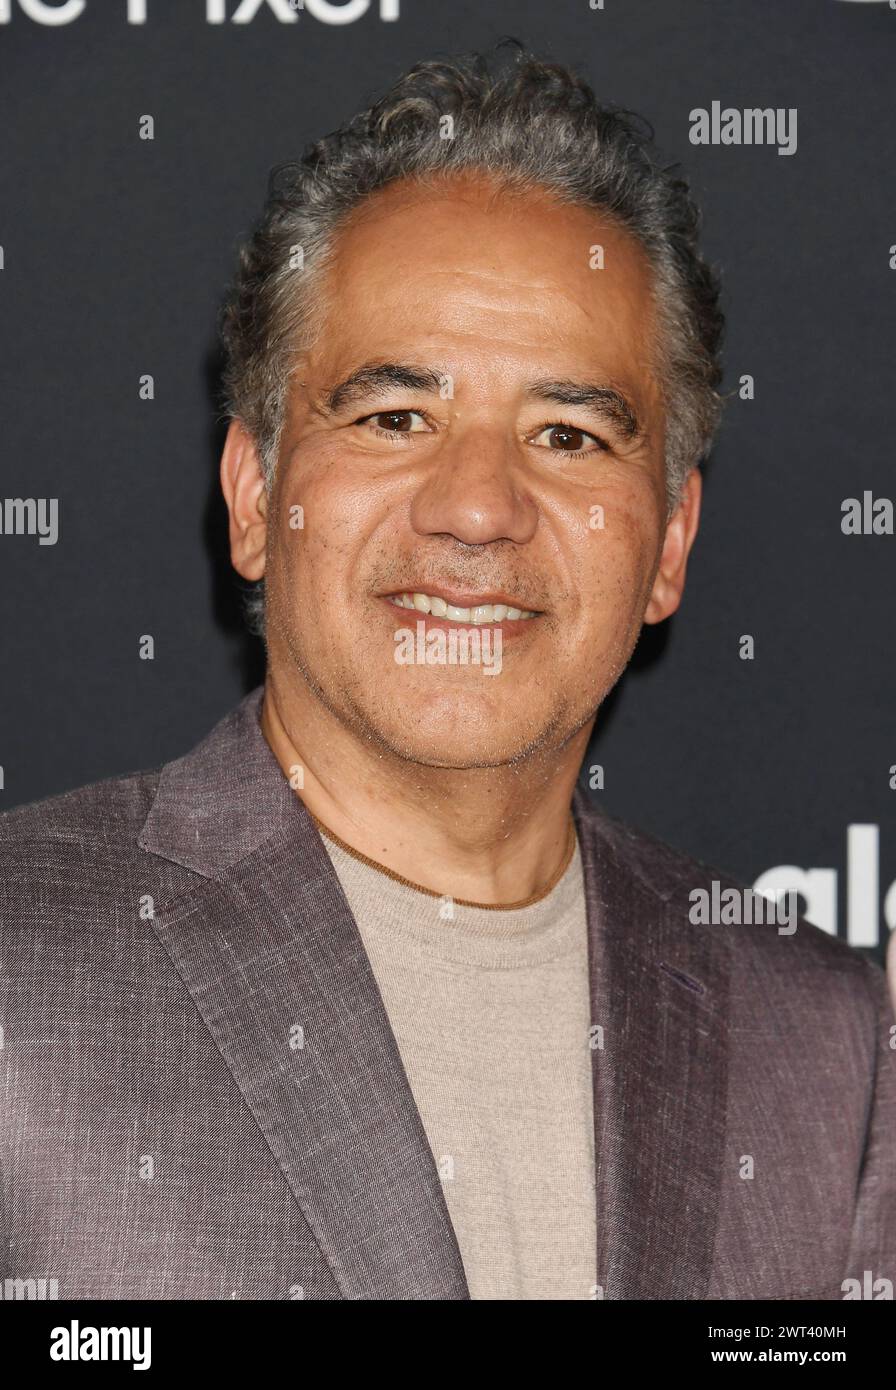 BEVERLY HILLS, CALIFORNIA - MARCH 14: John Ortiz attends the 35th Annual GLAAD Media Awards at The Beverly Hilton Hotel on March 14, 2024 in Beverly H Stock Photo